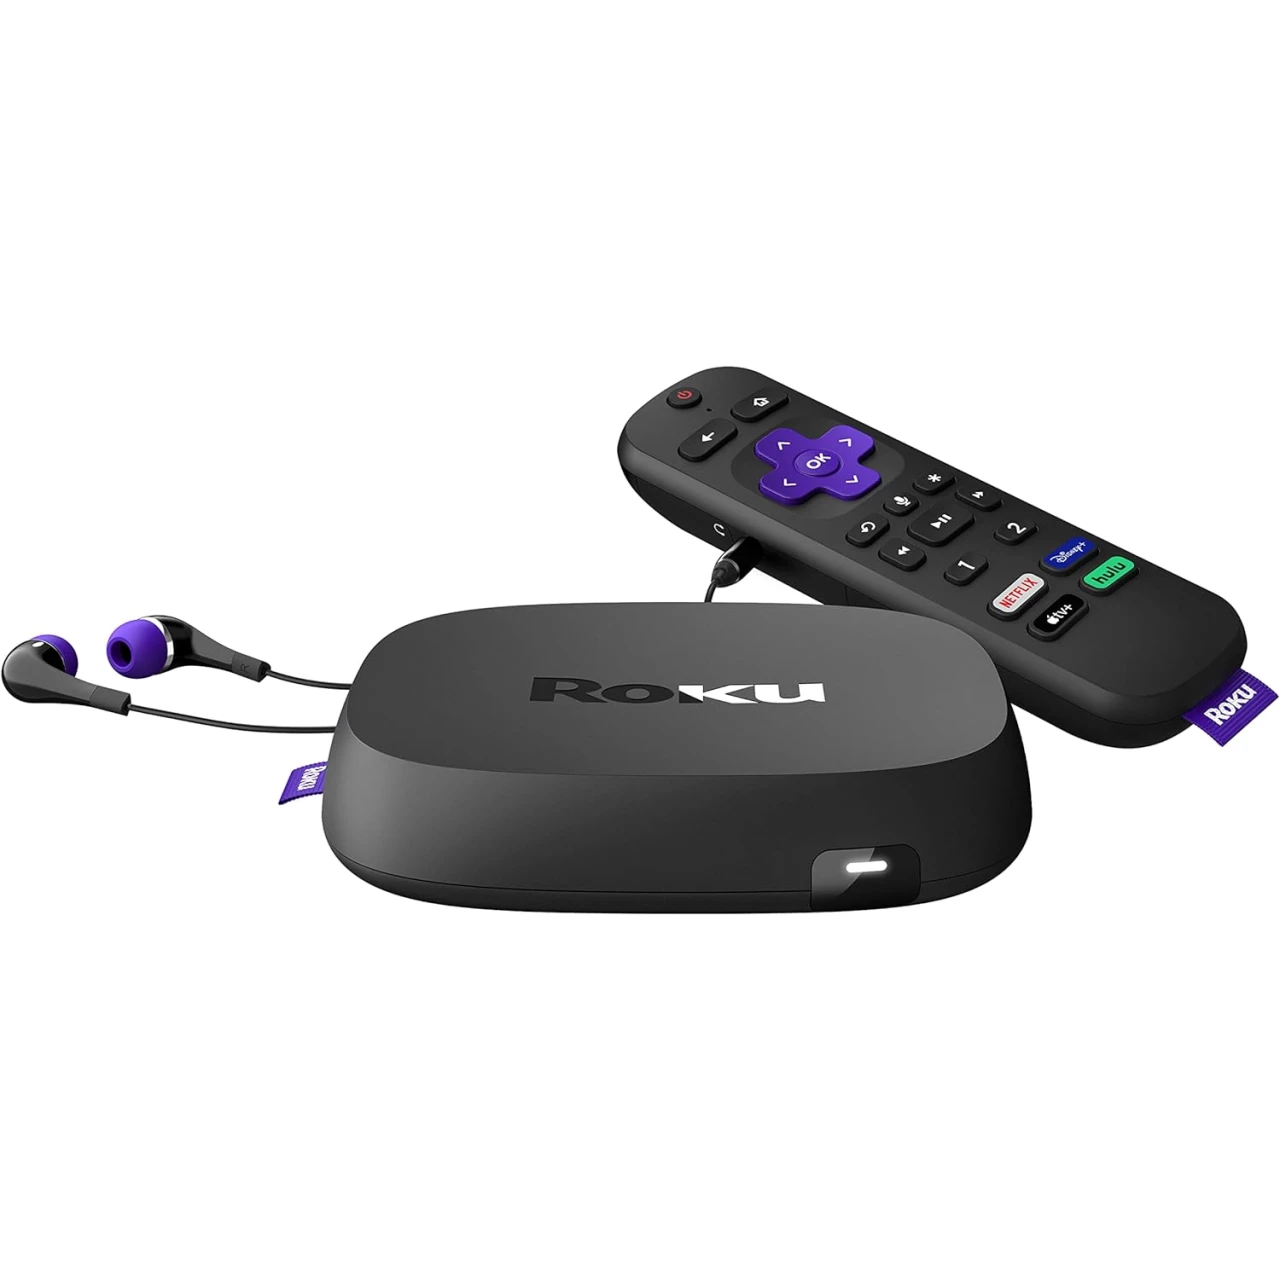 Roku Ultra 2020 | Streaming Media Player HD/4K/HDR, Bluetooth Streaming, and Roku Voice Remote with Headphone Jack and Personal Shortcuts, includes Premium HDMI Cable (Renewed)